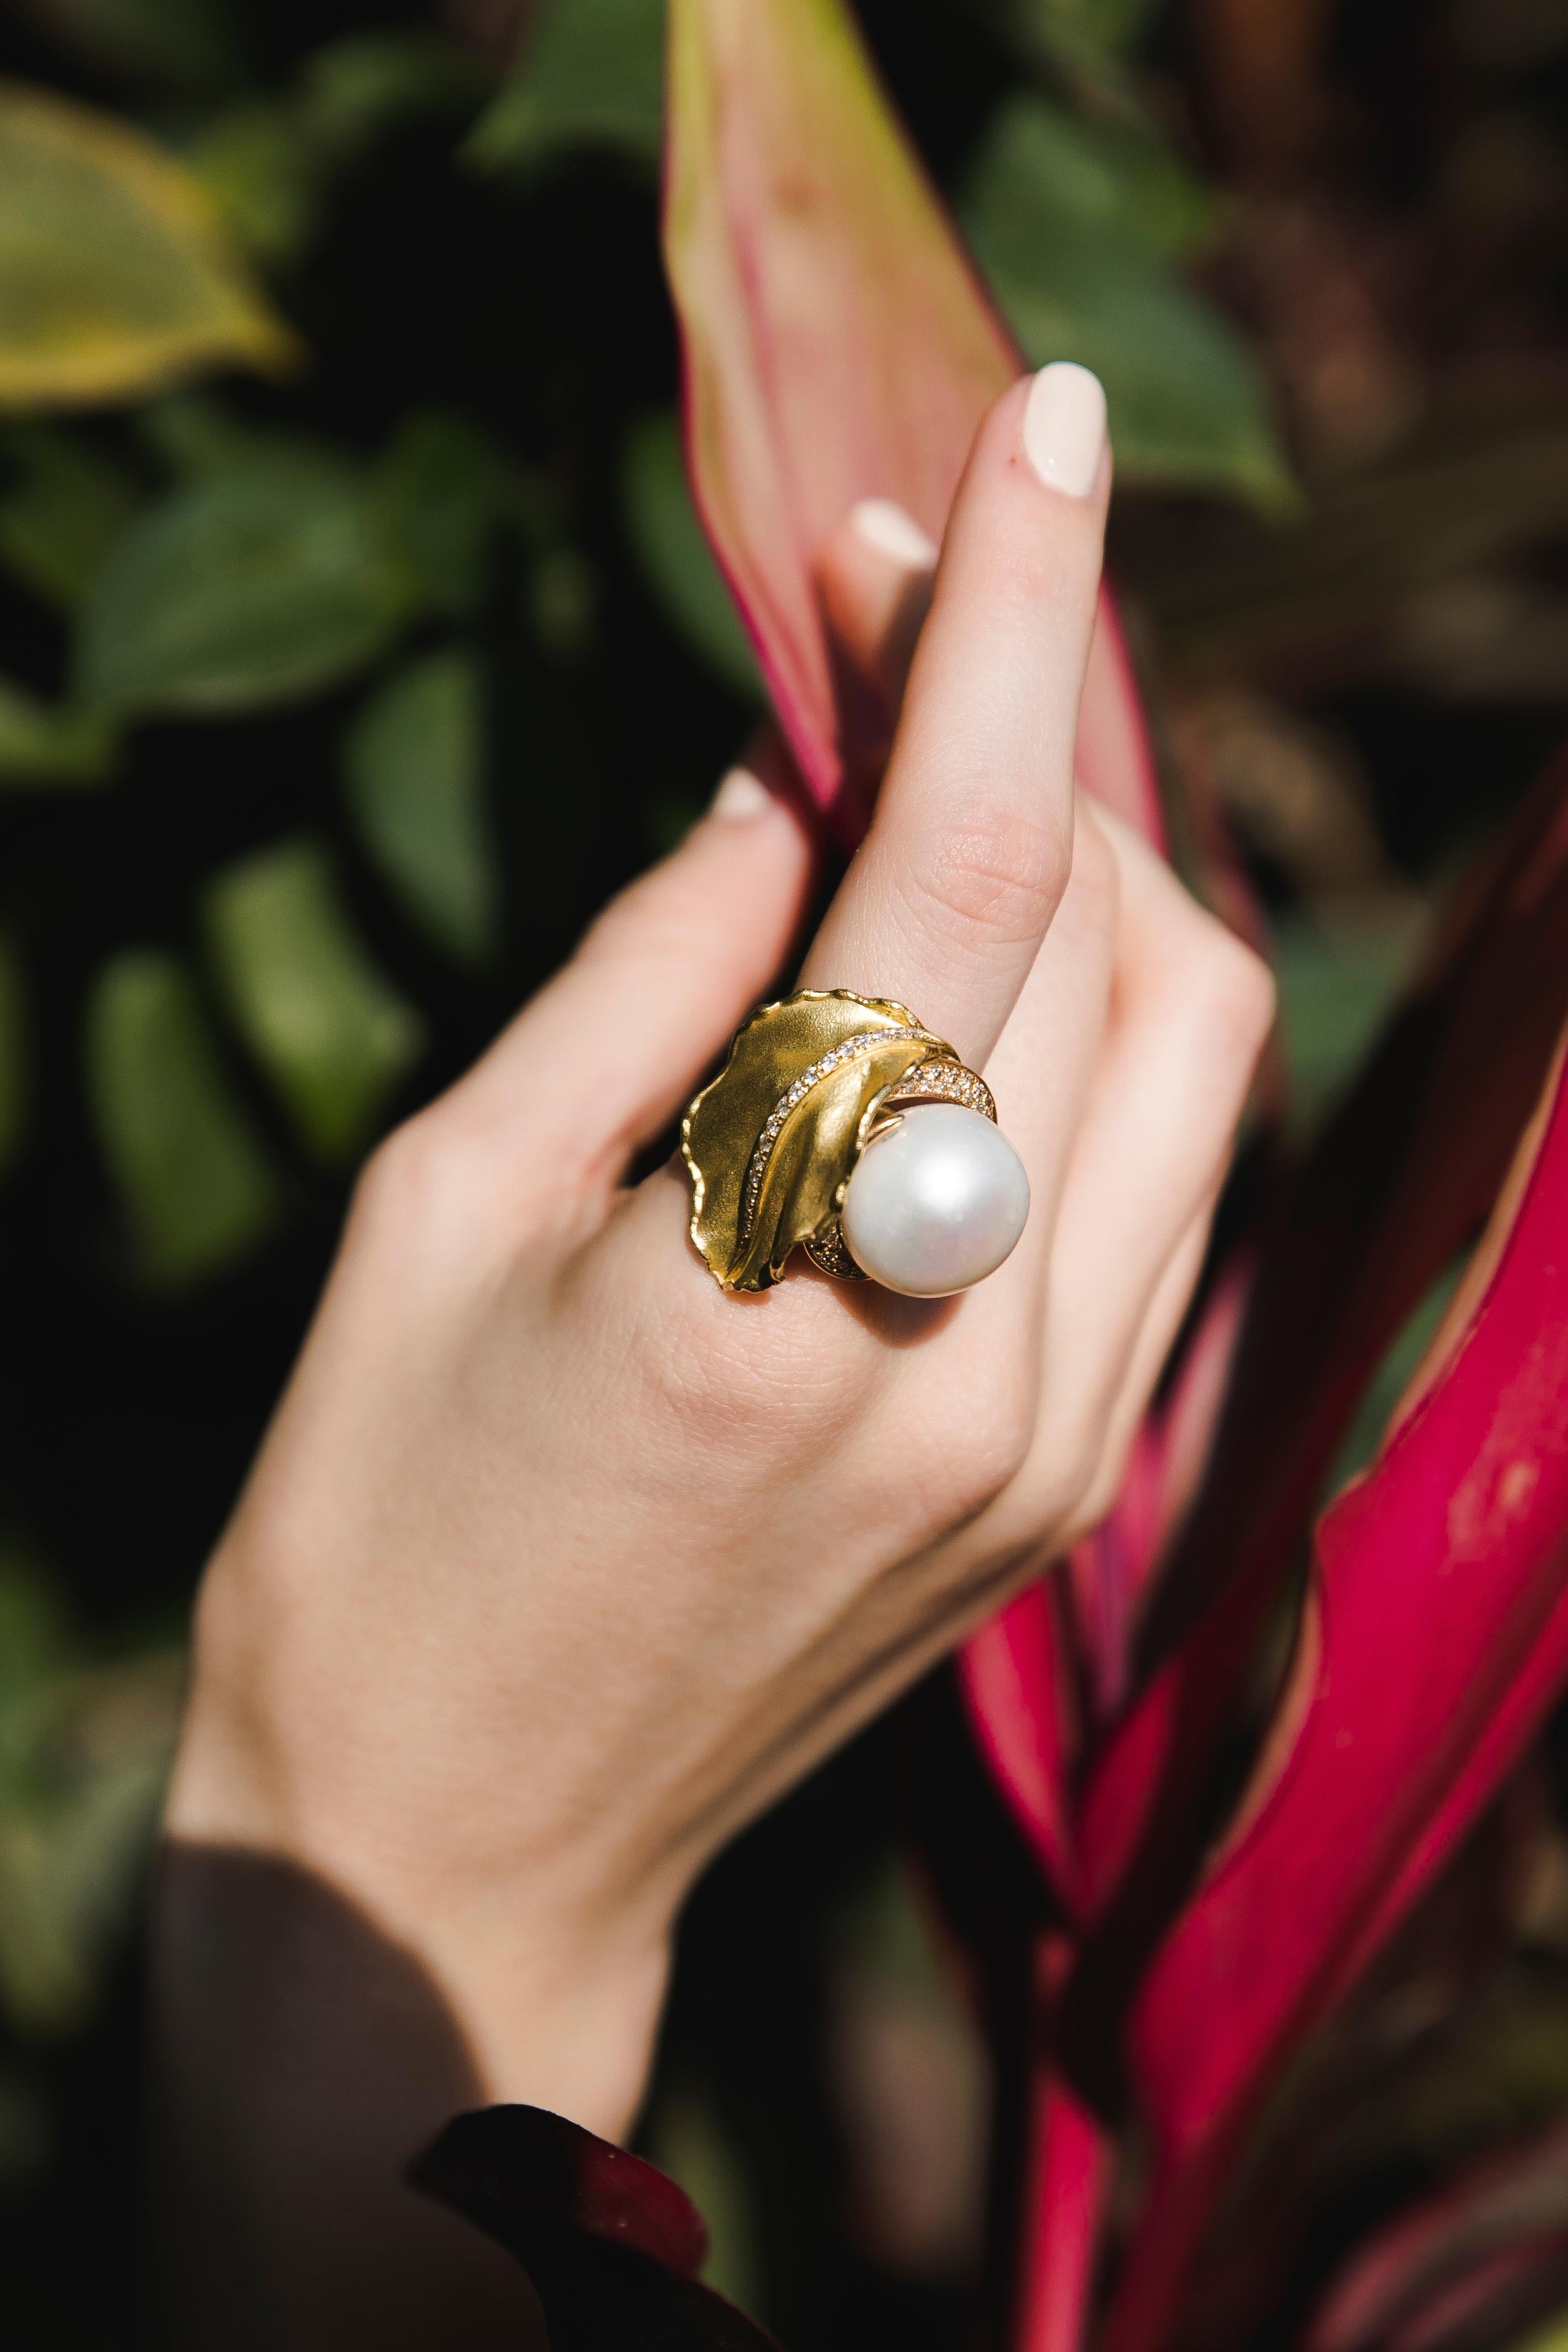 South Sea Pearl Diamonds 18 Karat Yellow Gold Floral Ring, 1970
Massive 17.5 mm South Sea Pearl masterfully rolled into a Yellow Gold leaf with a line of round-cut Diamonds.  1970es - an epitome of the Gold-rush era. Bold design lets you wear the